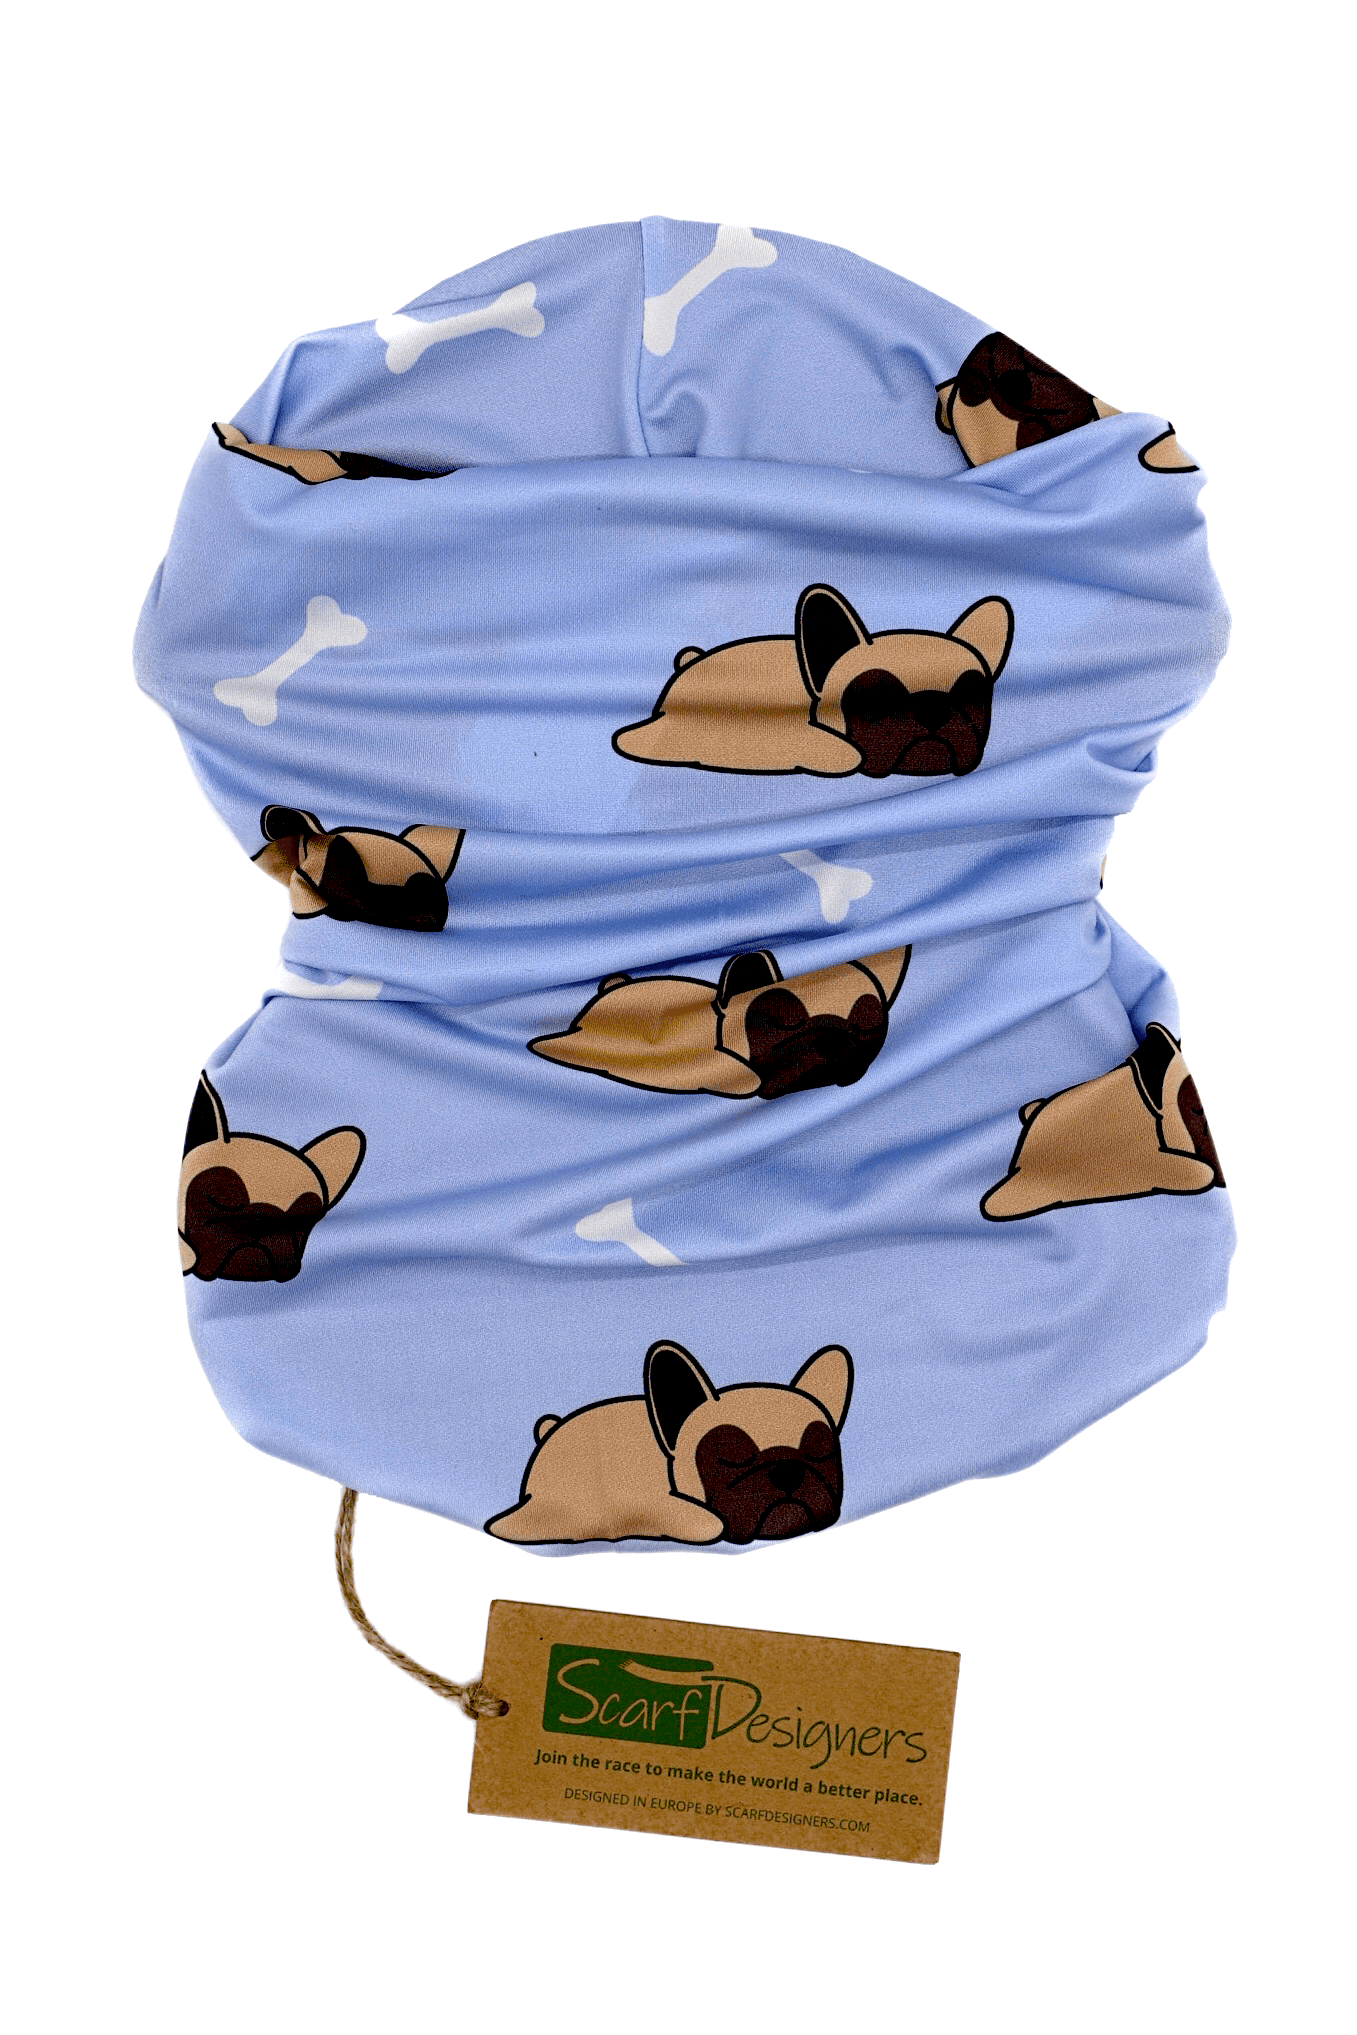 This is a unisex, multifunctional and sustainable bandana with a French Bulldog print in light blue. It is made from recycled polyester which is breathable, durable, soft to touch, easy to care and fast drying material. It makes it perfectly suitable for all kinds of sports like biking, hiking, jogging or skiing. This is a versatile bandana that can be used as a scarf, face mask, bandana or headband and it is also known as tube scarf, neck gaiter or face mask. It is a vegan product certified by PETA.